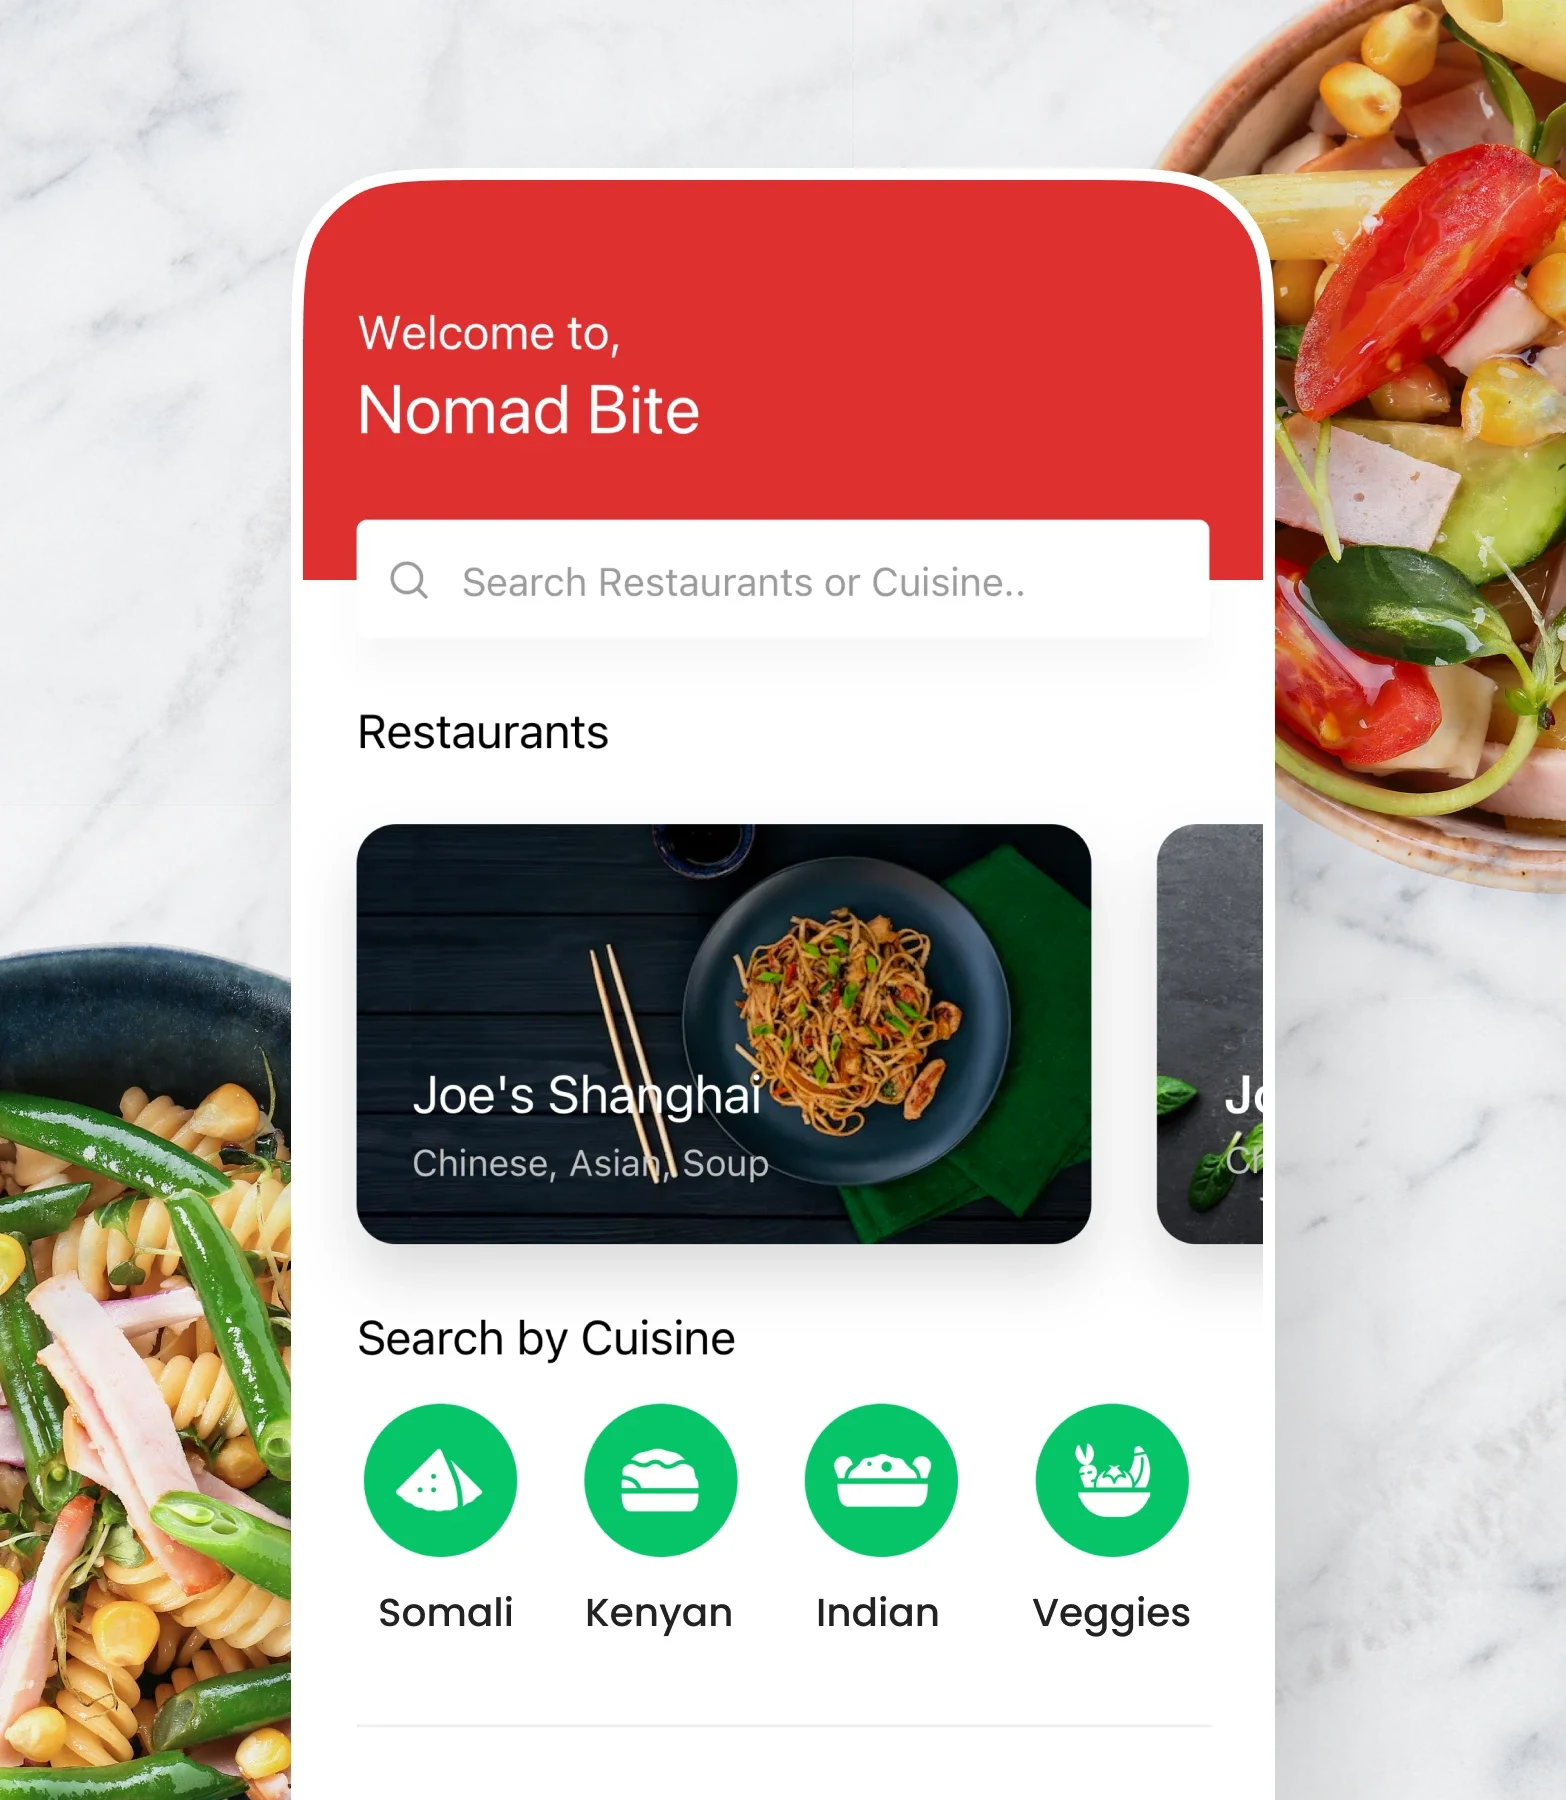 Nomad Bite is a Food Delivery Software in Africa